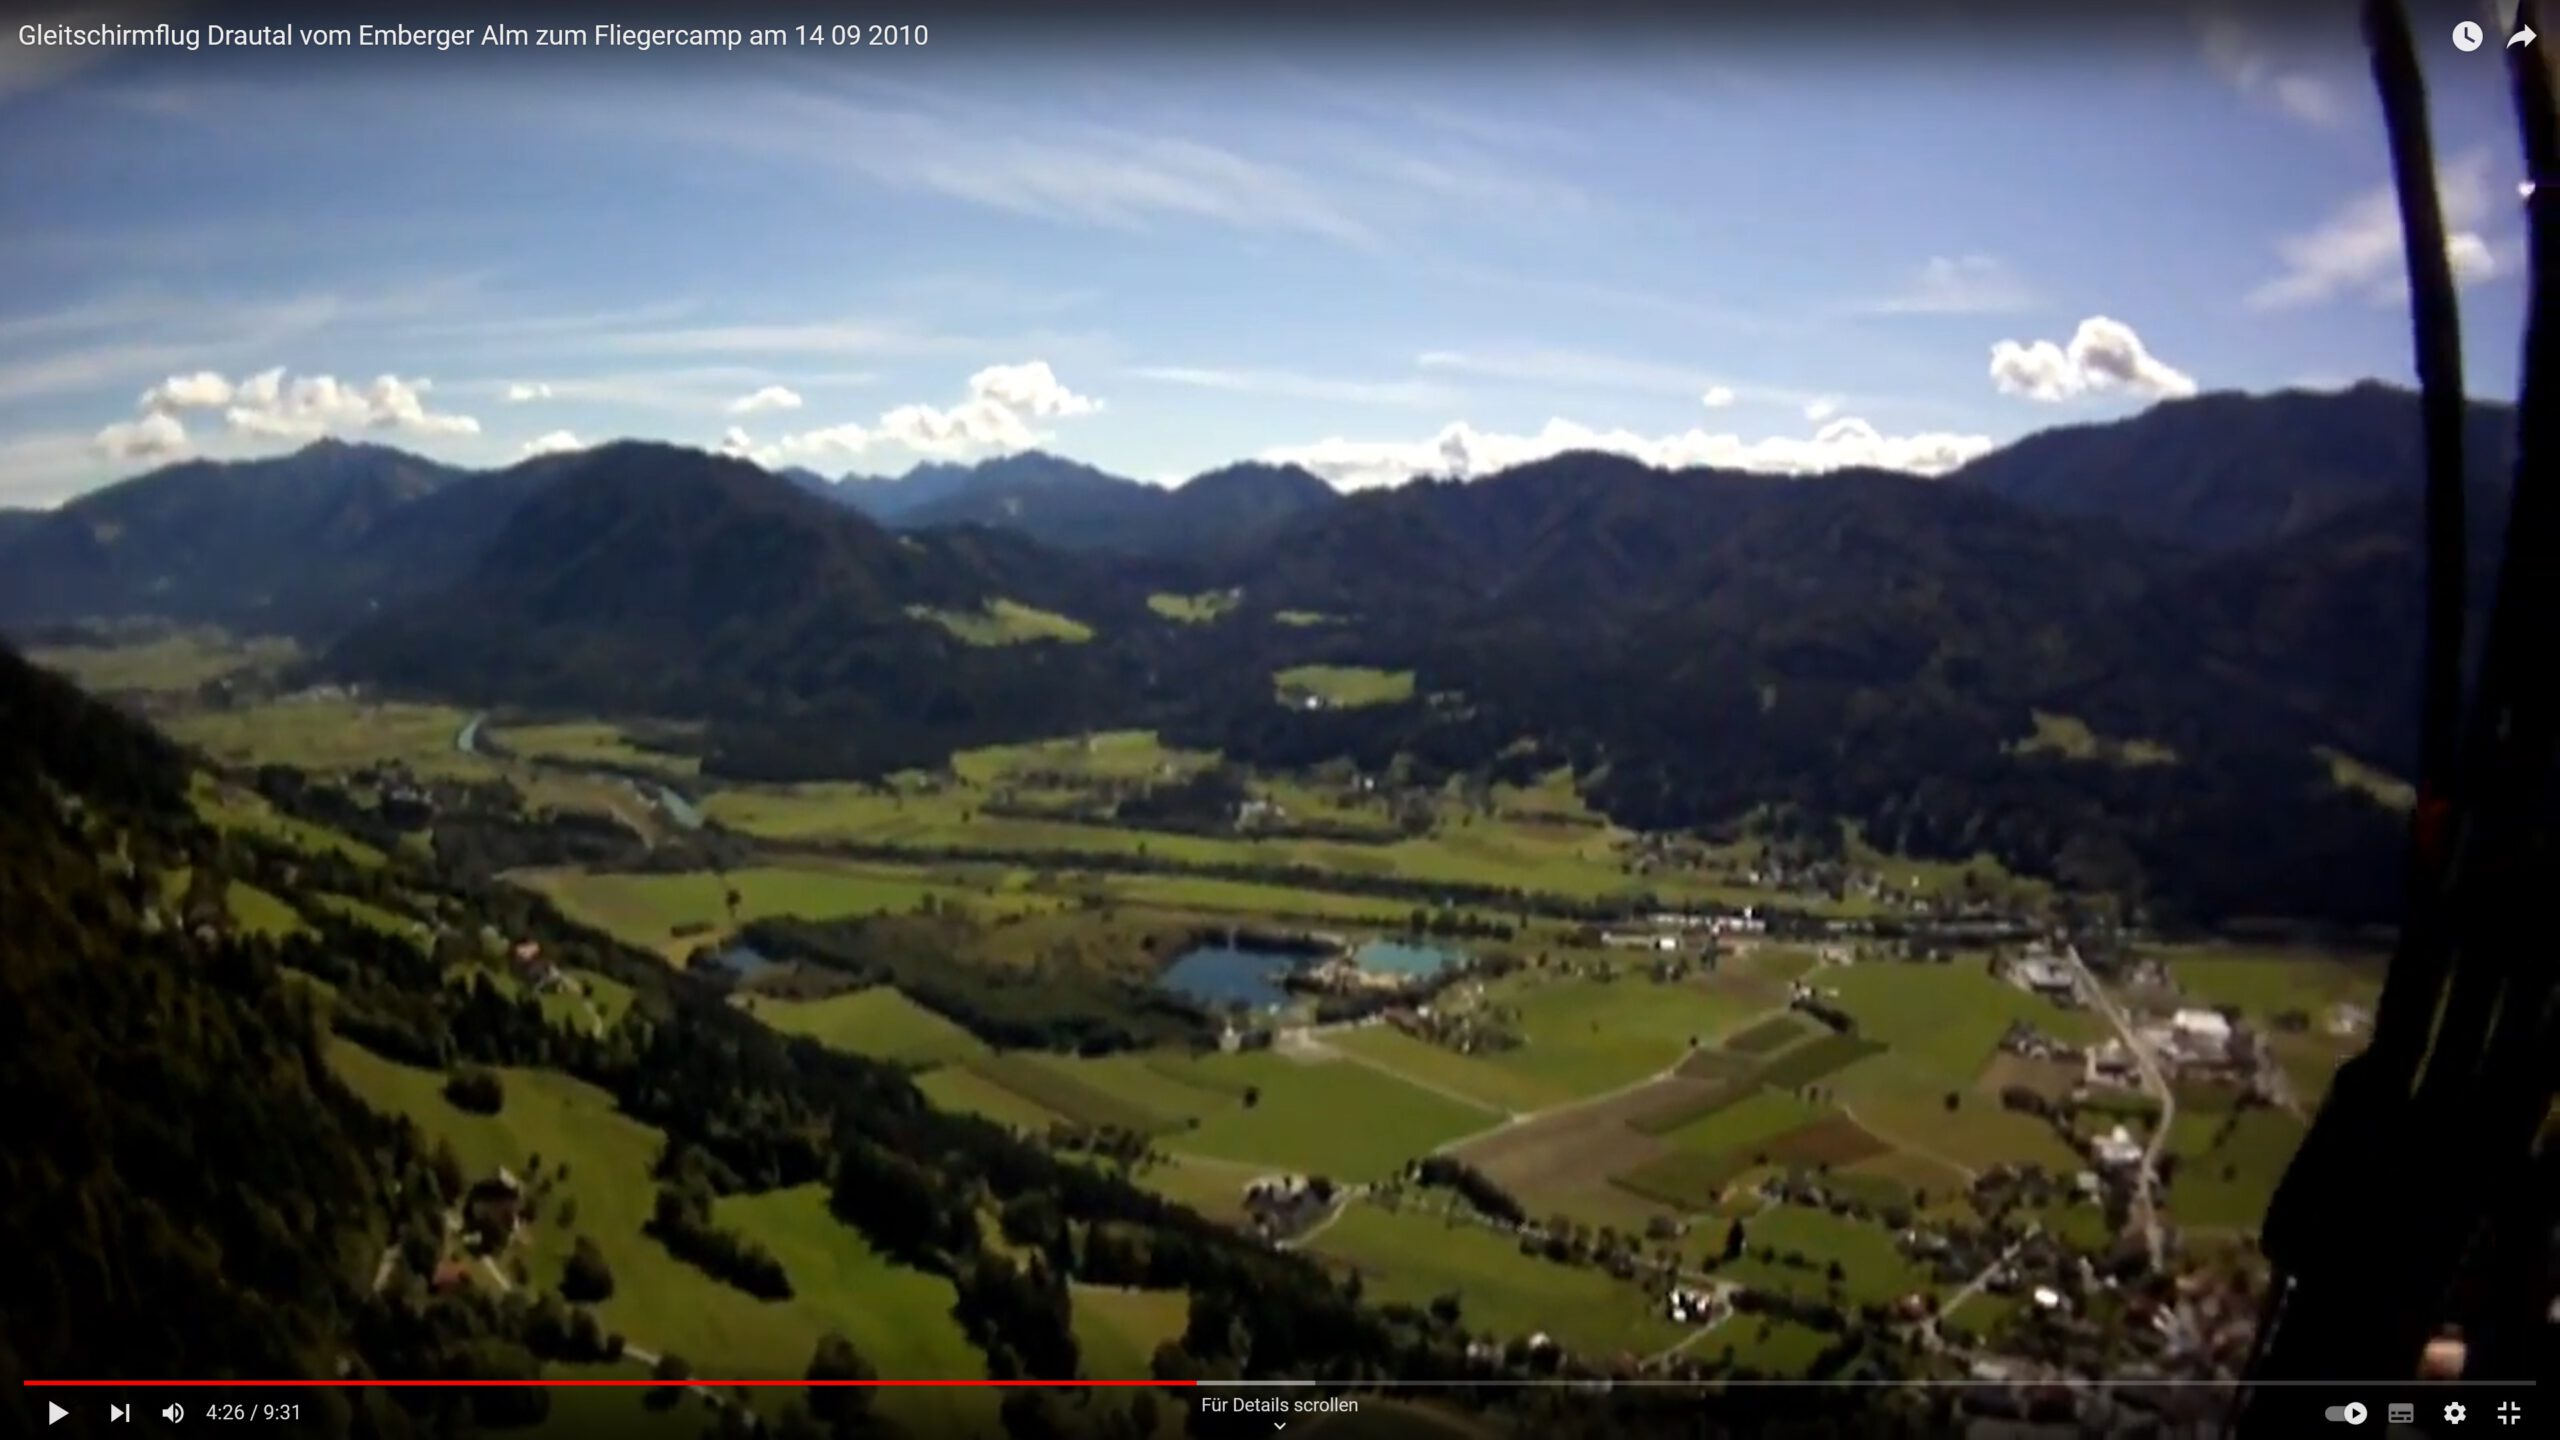 You are currently viewing Paragliding Drautal from Emberger Alm to Fliegercamp